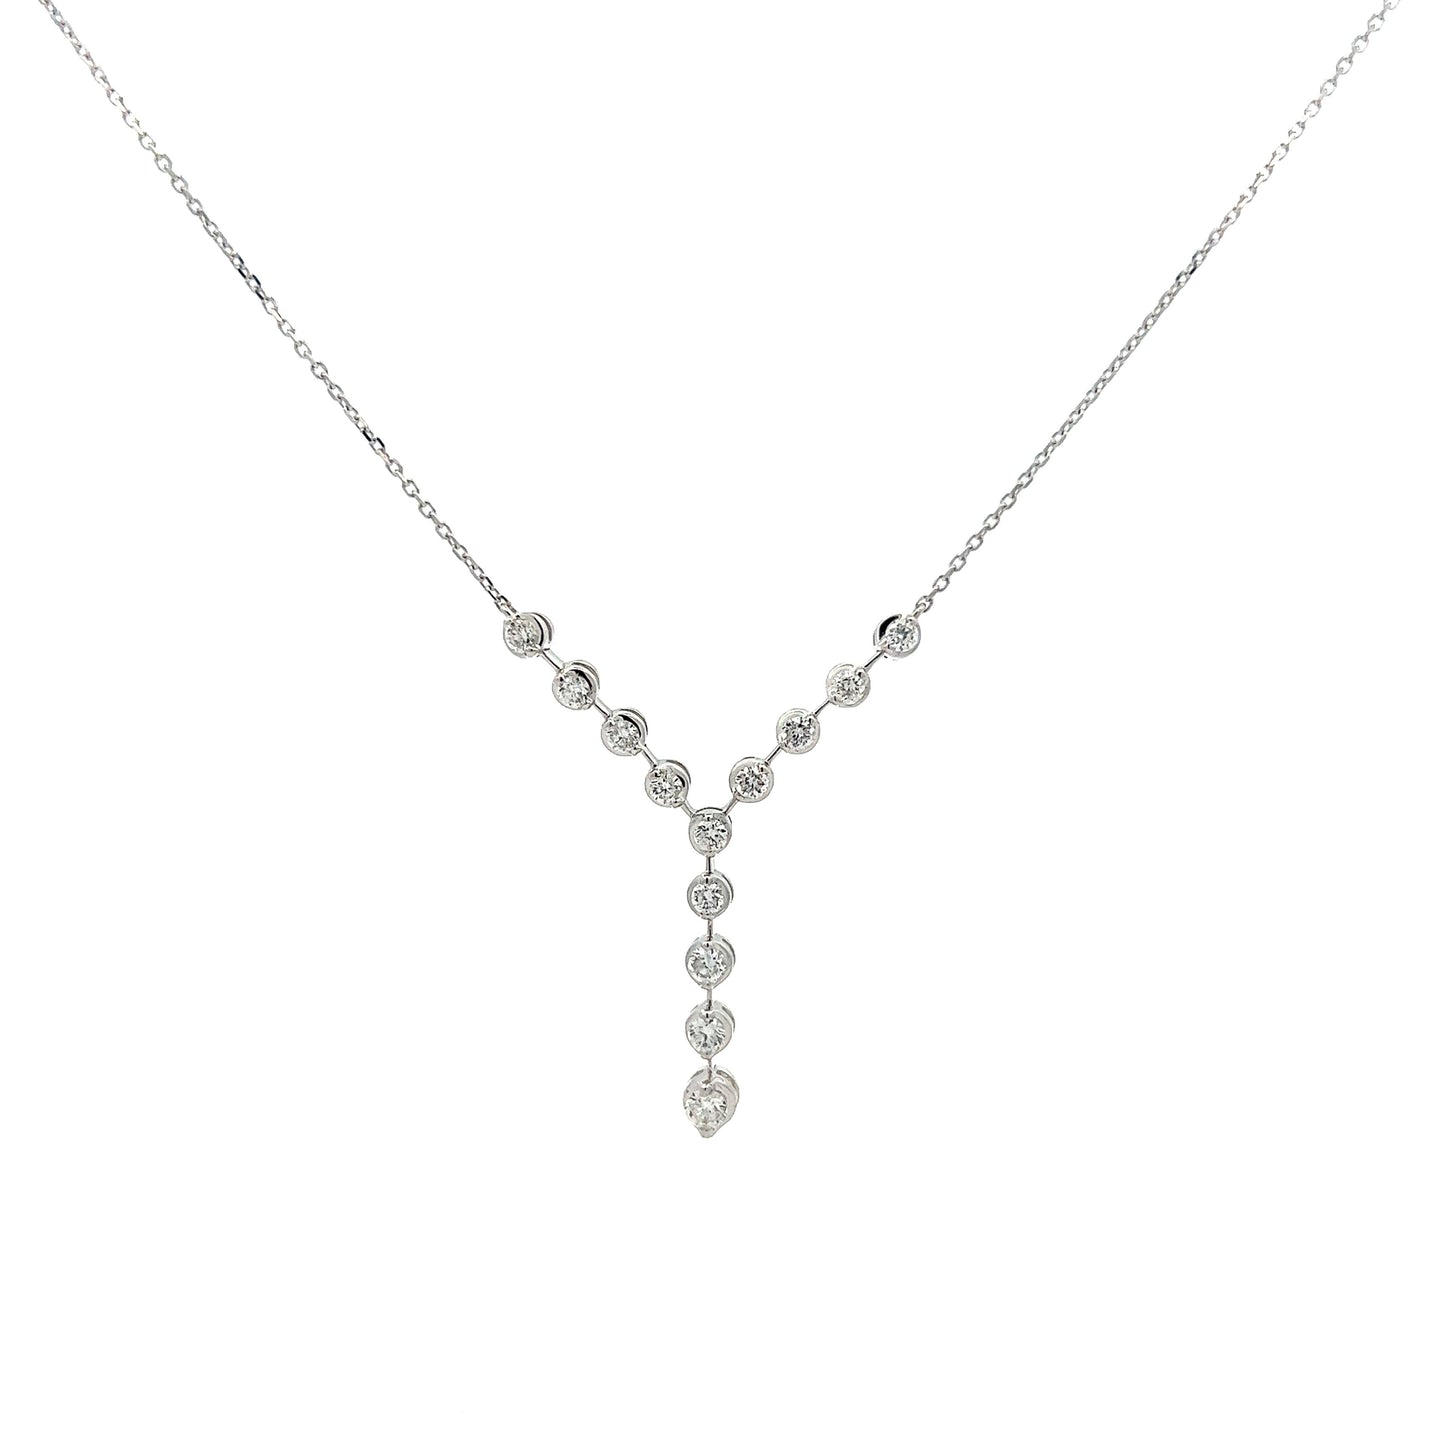 Y Shaped Diamond Pendant Necklace in White Gold